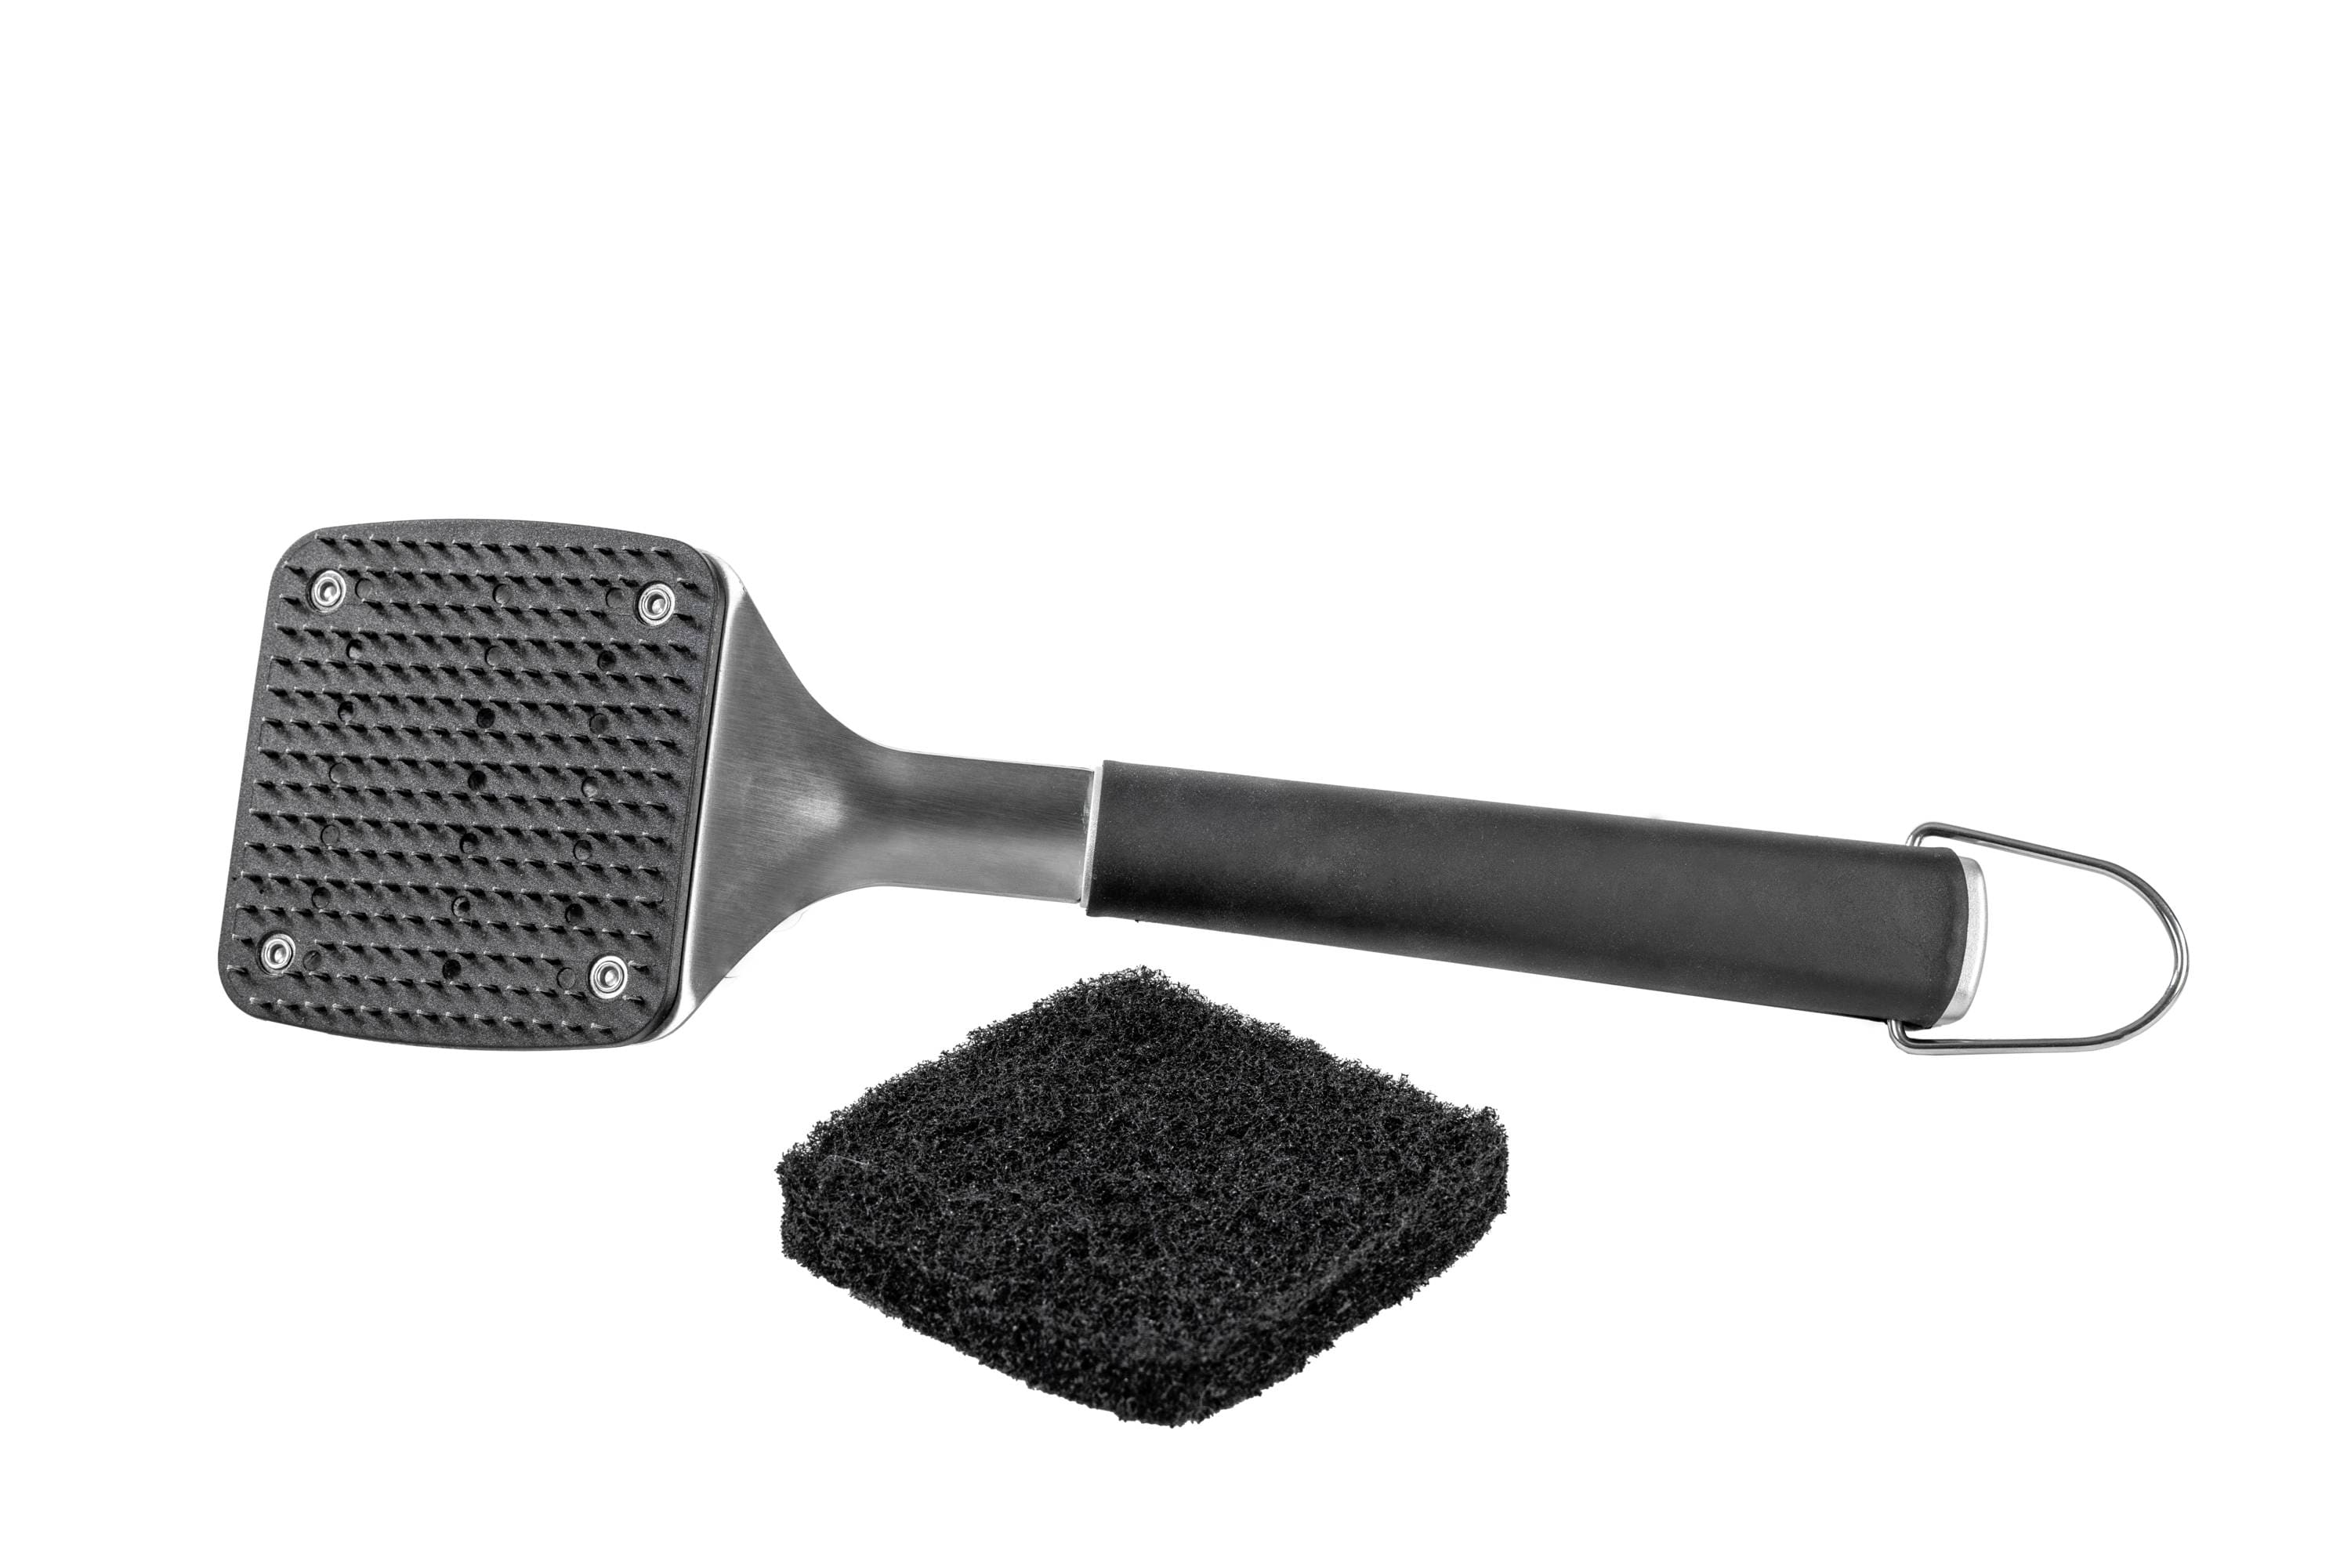  KP 3 in 1 Dream Set- Safe Grill Cleaning Kit - Bristle